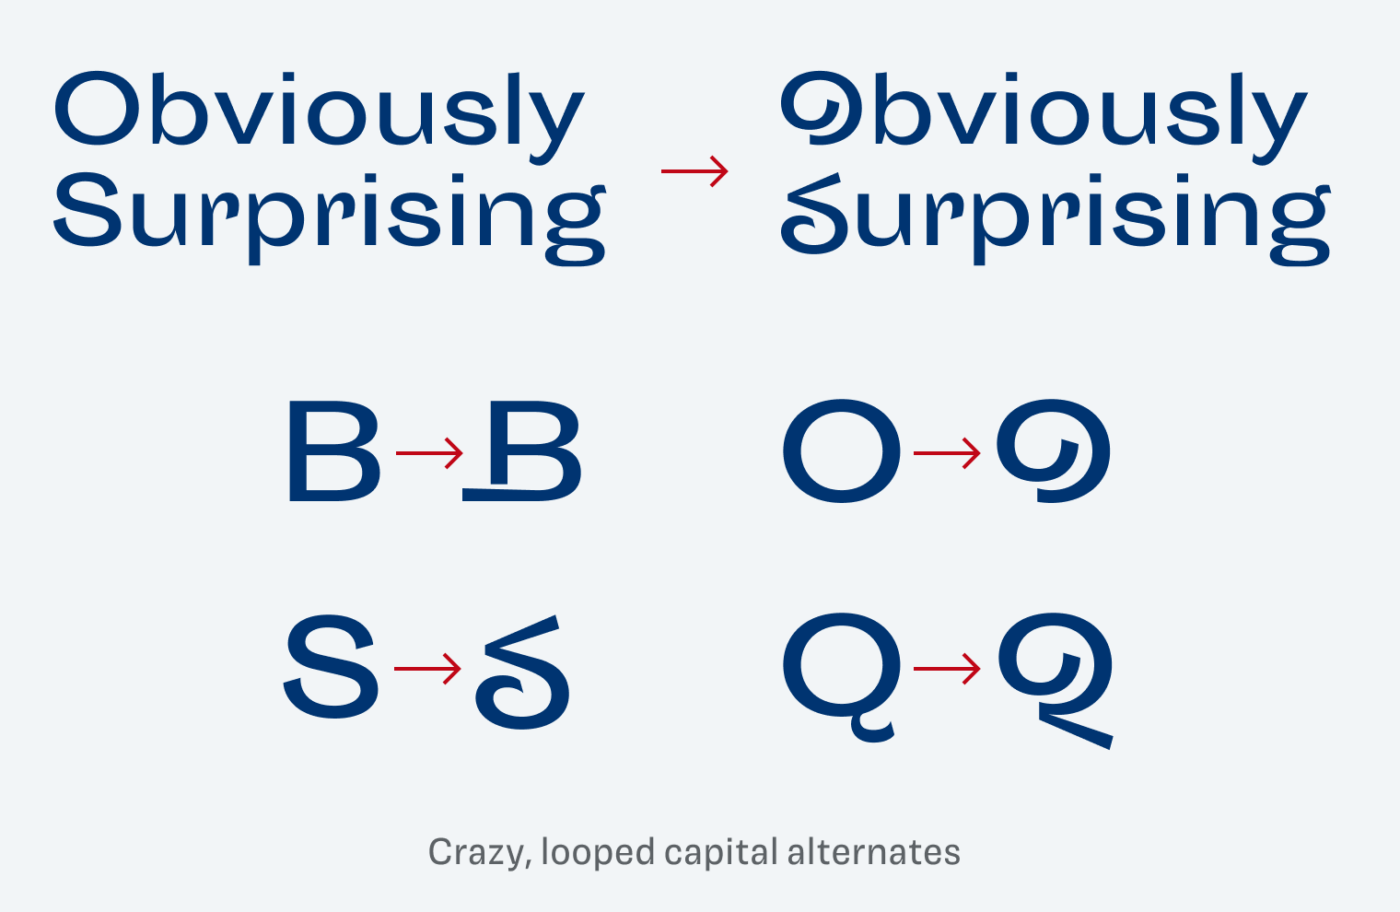 Obviously Surprising – Crazy, looped capital alternates for the B, S, O and Q